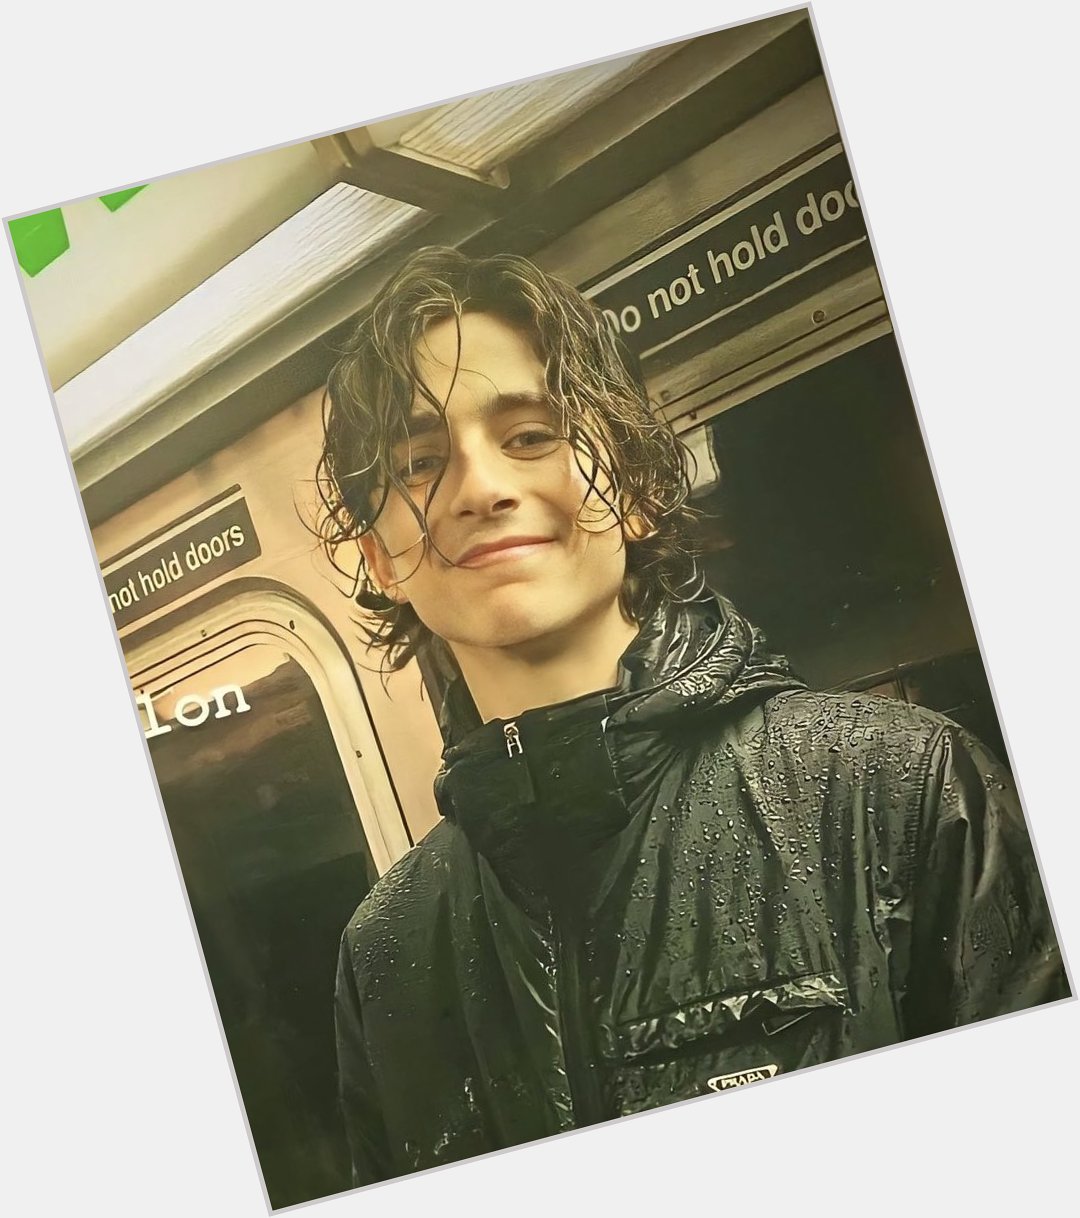 Happy birthday to the love of my life and light of my days, timothée chalamet <3 